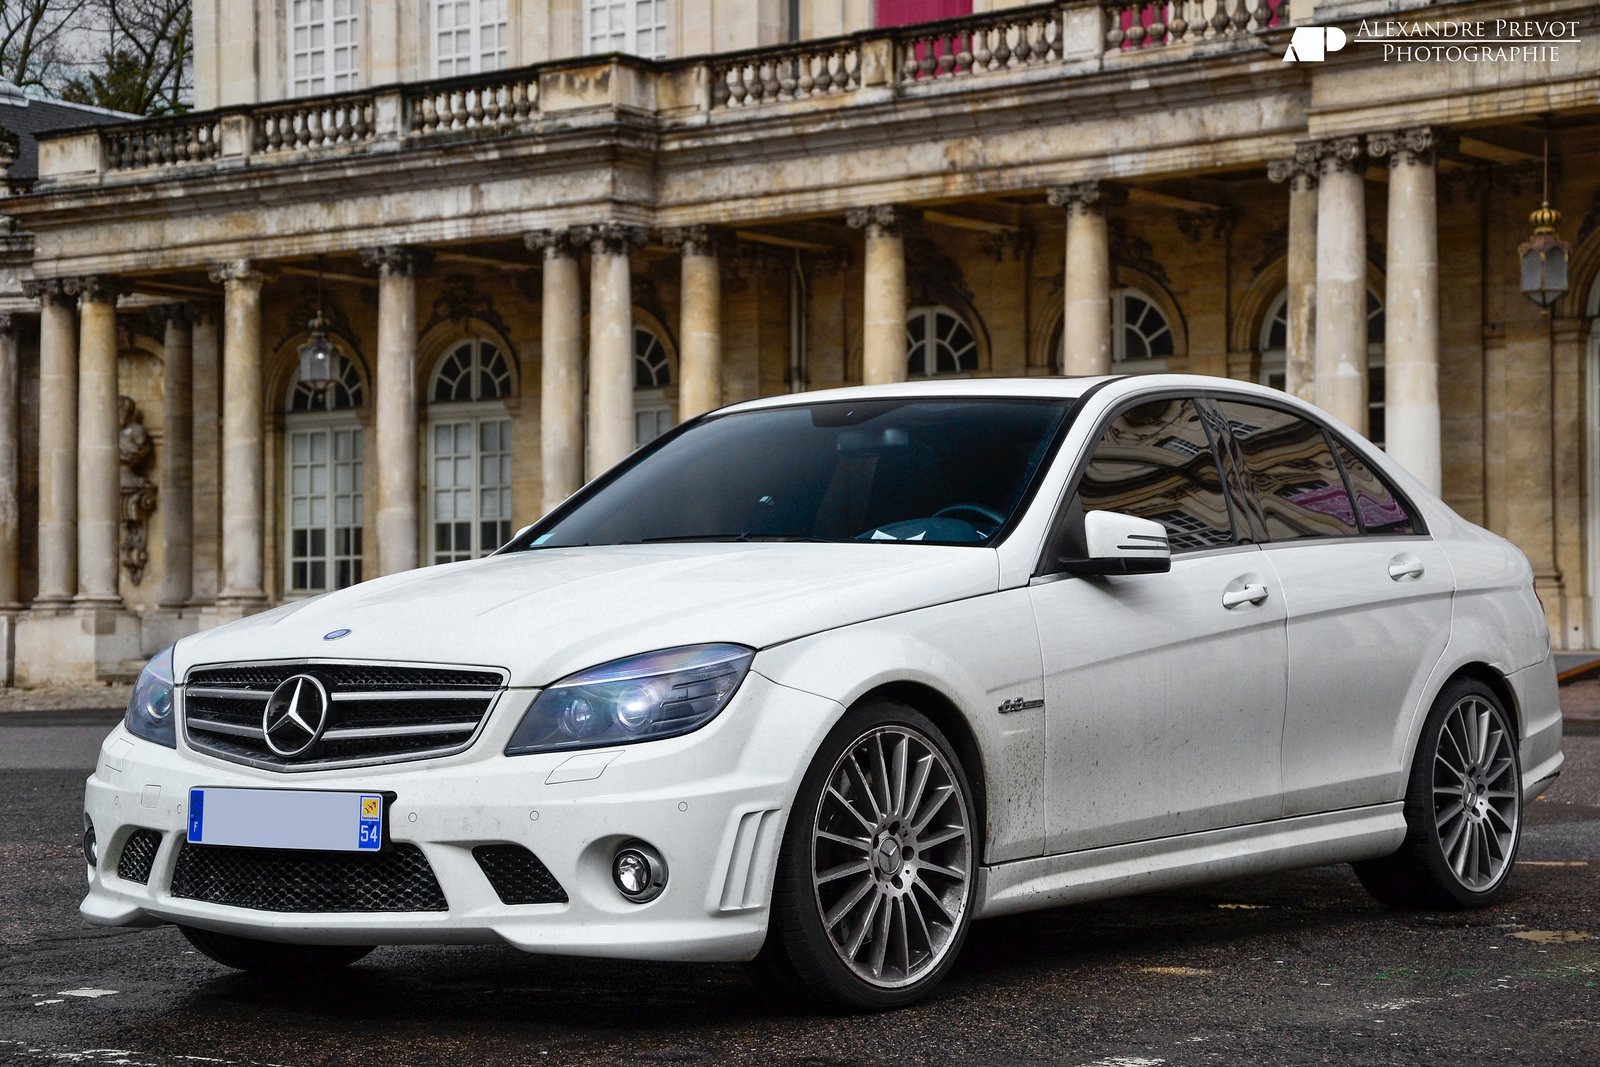 How much is Mercedes Benz car insurance?